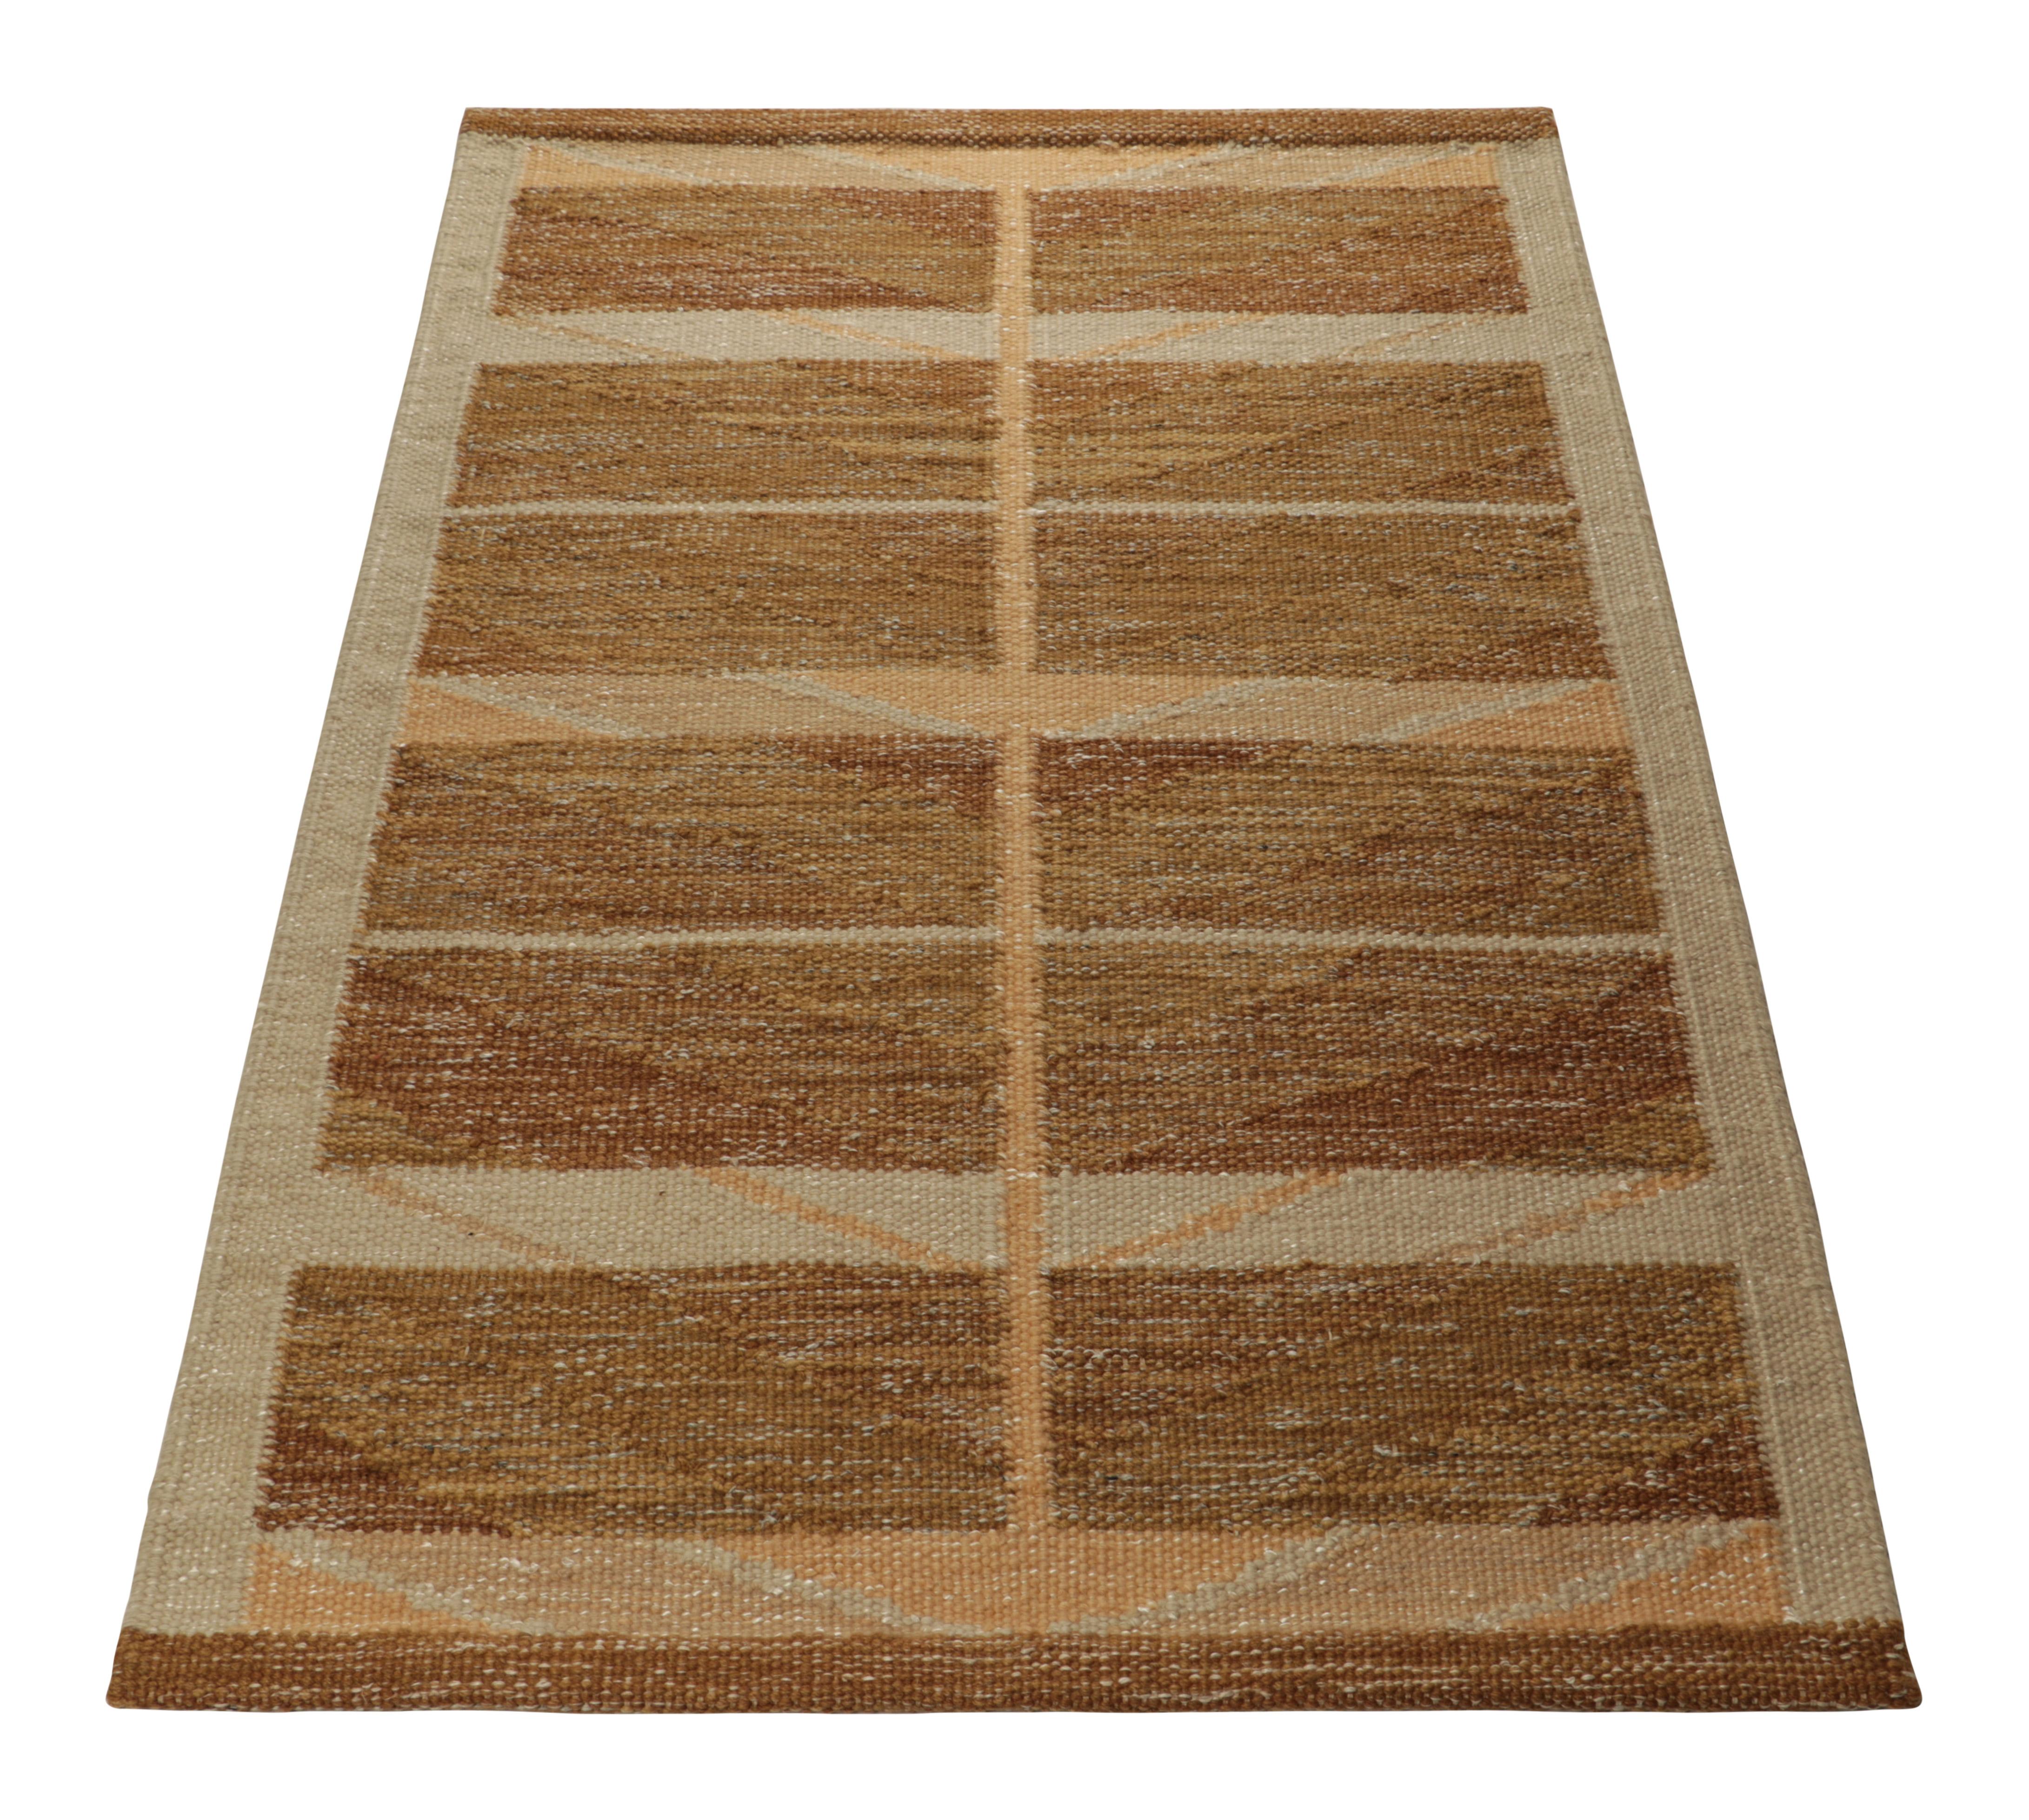 Indian Rug & Kilim’s Scandinavian Style Rug in Beige-Brown, with Geometric Patterns For Sale